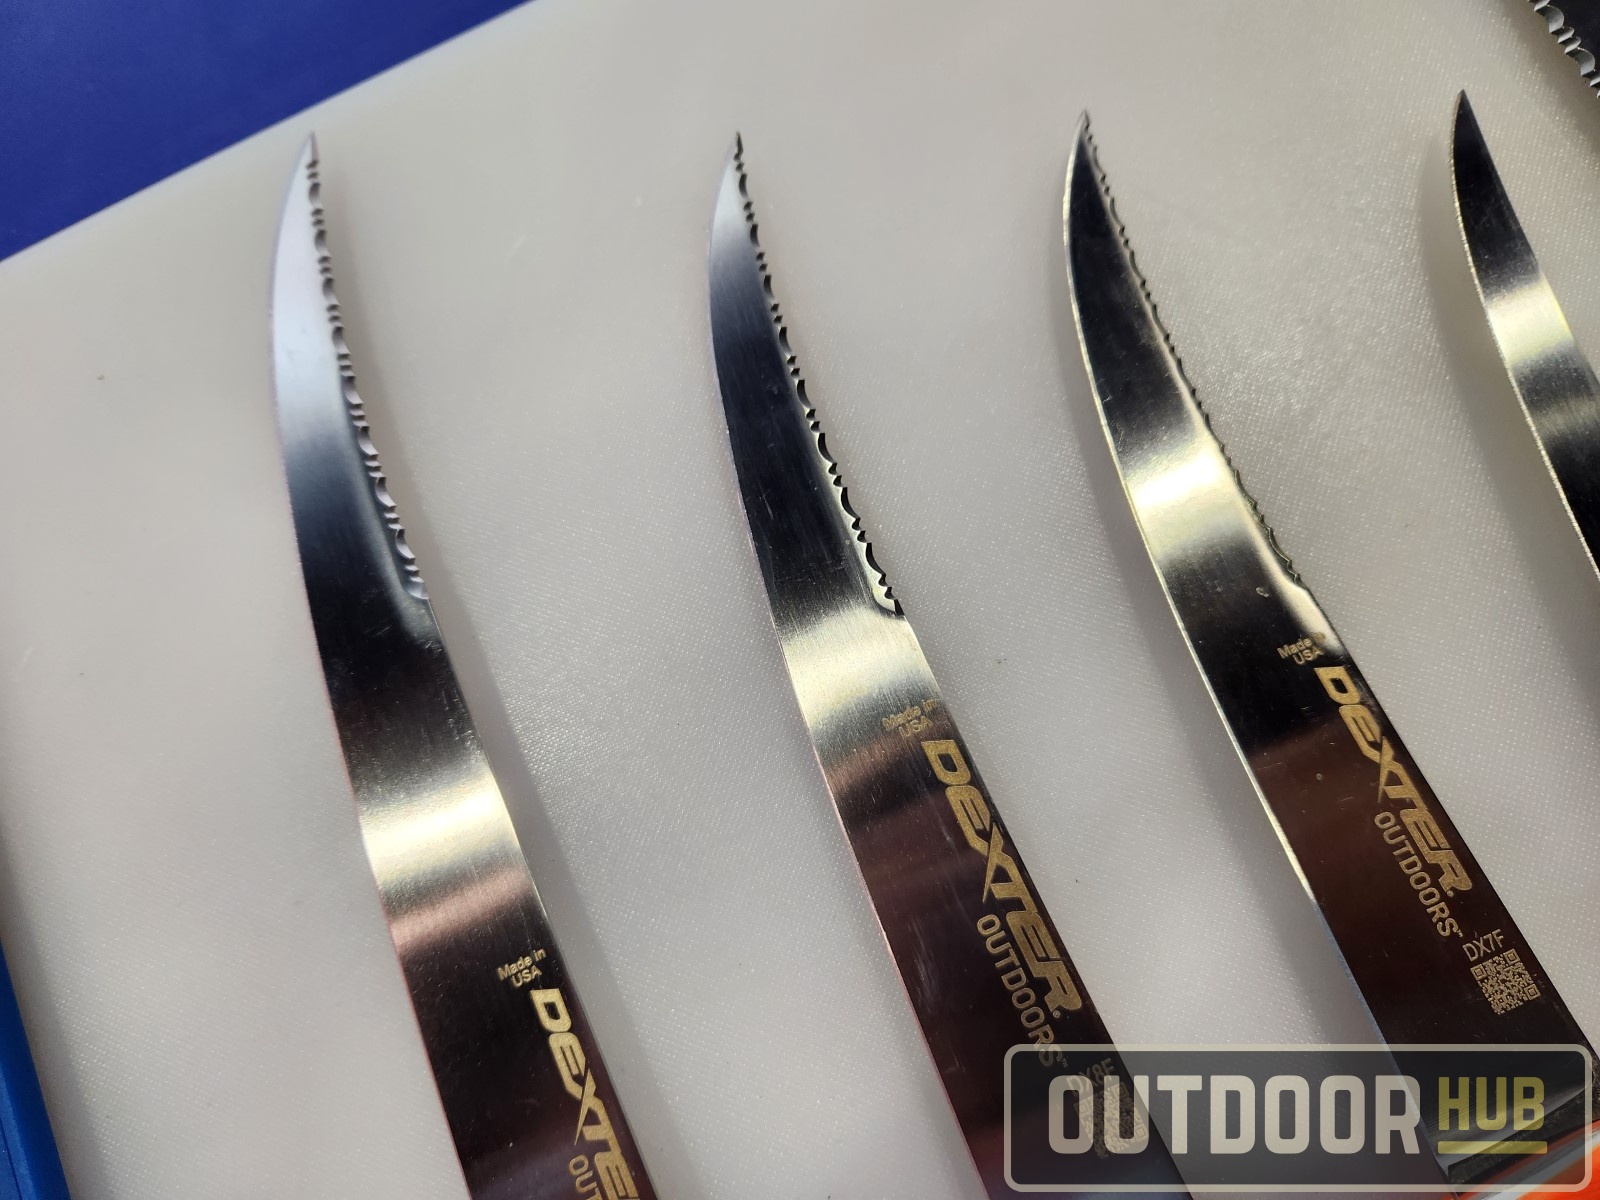 [ICAST 2023] Dexter Outdoors Brings 2 NEW Dextreme Knives